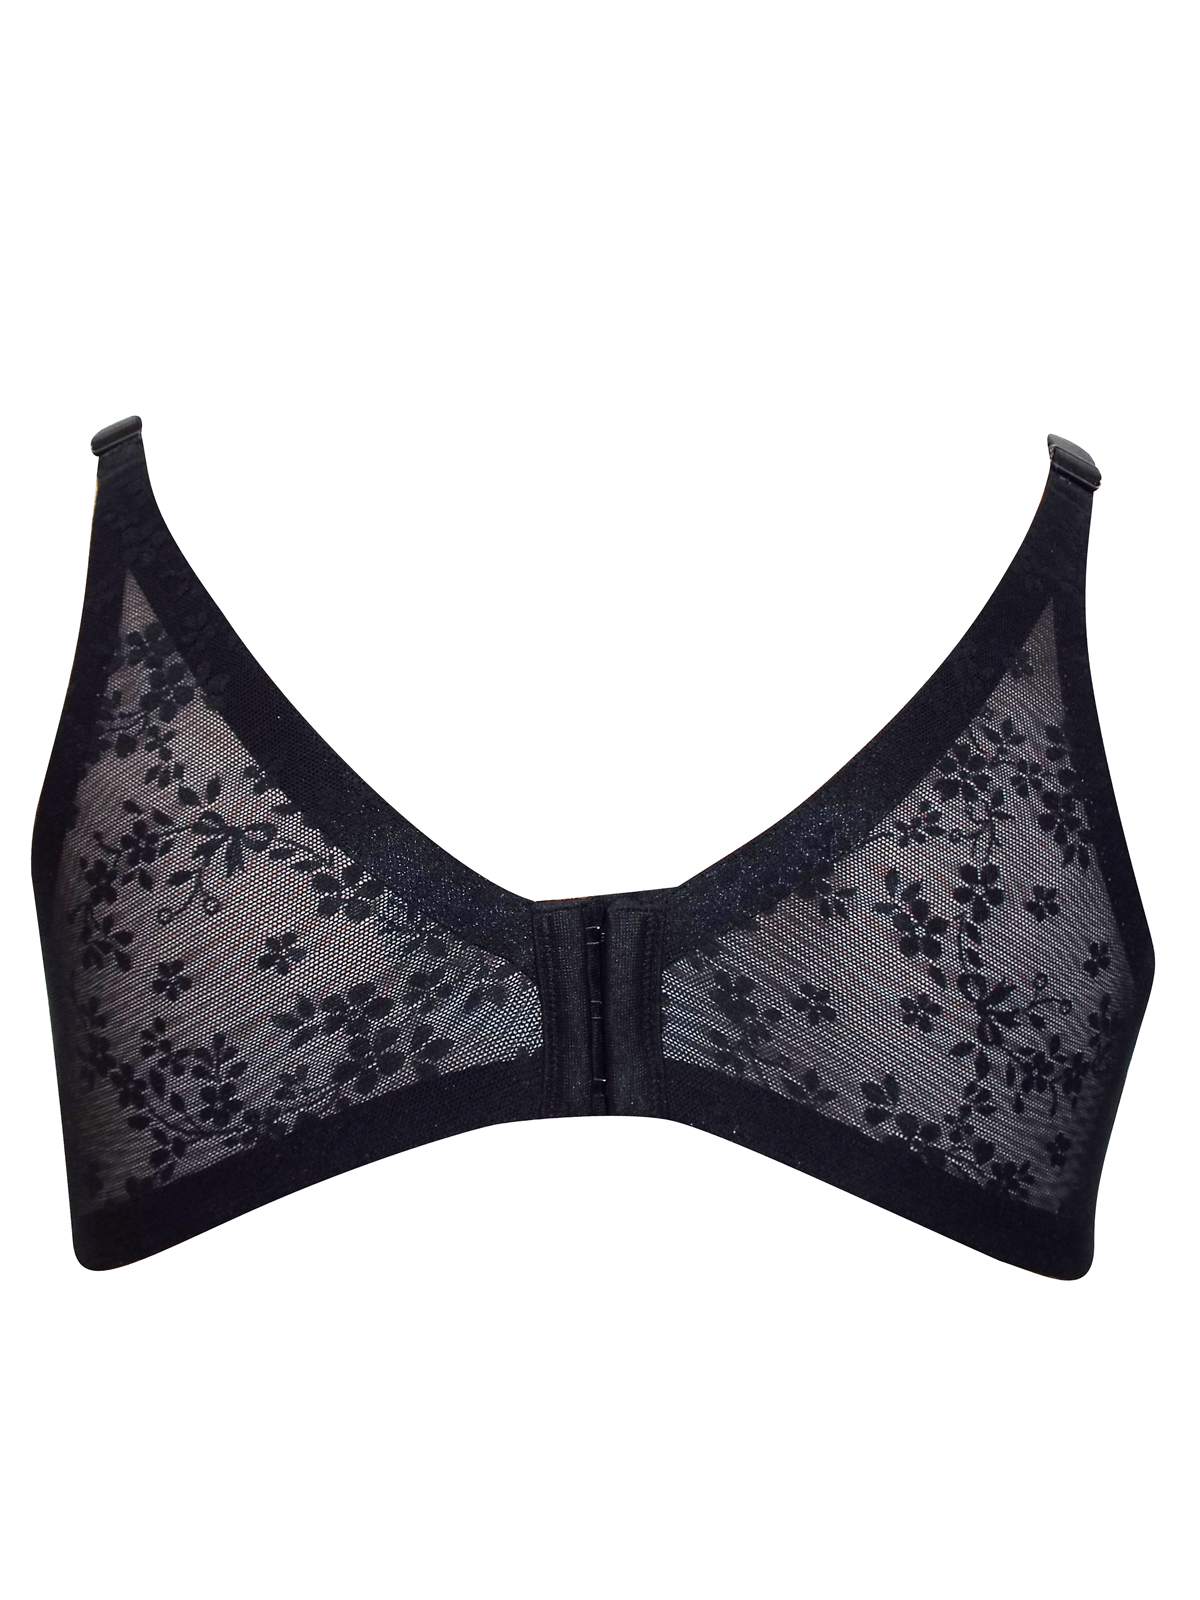 George - - G3orge BLACK Mesh Overlay Total Support Wired Full Cup Bra ...